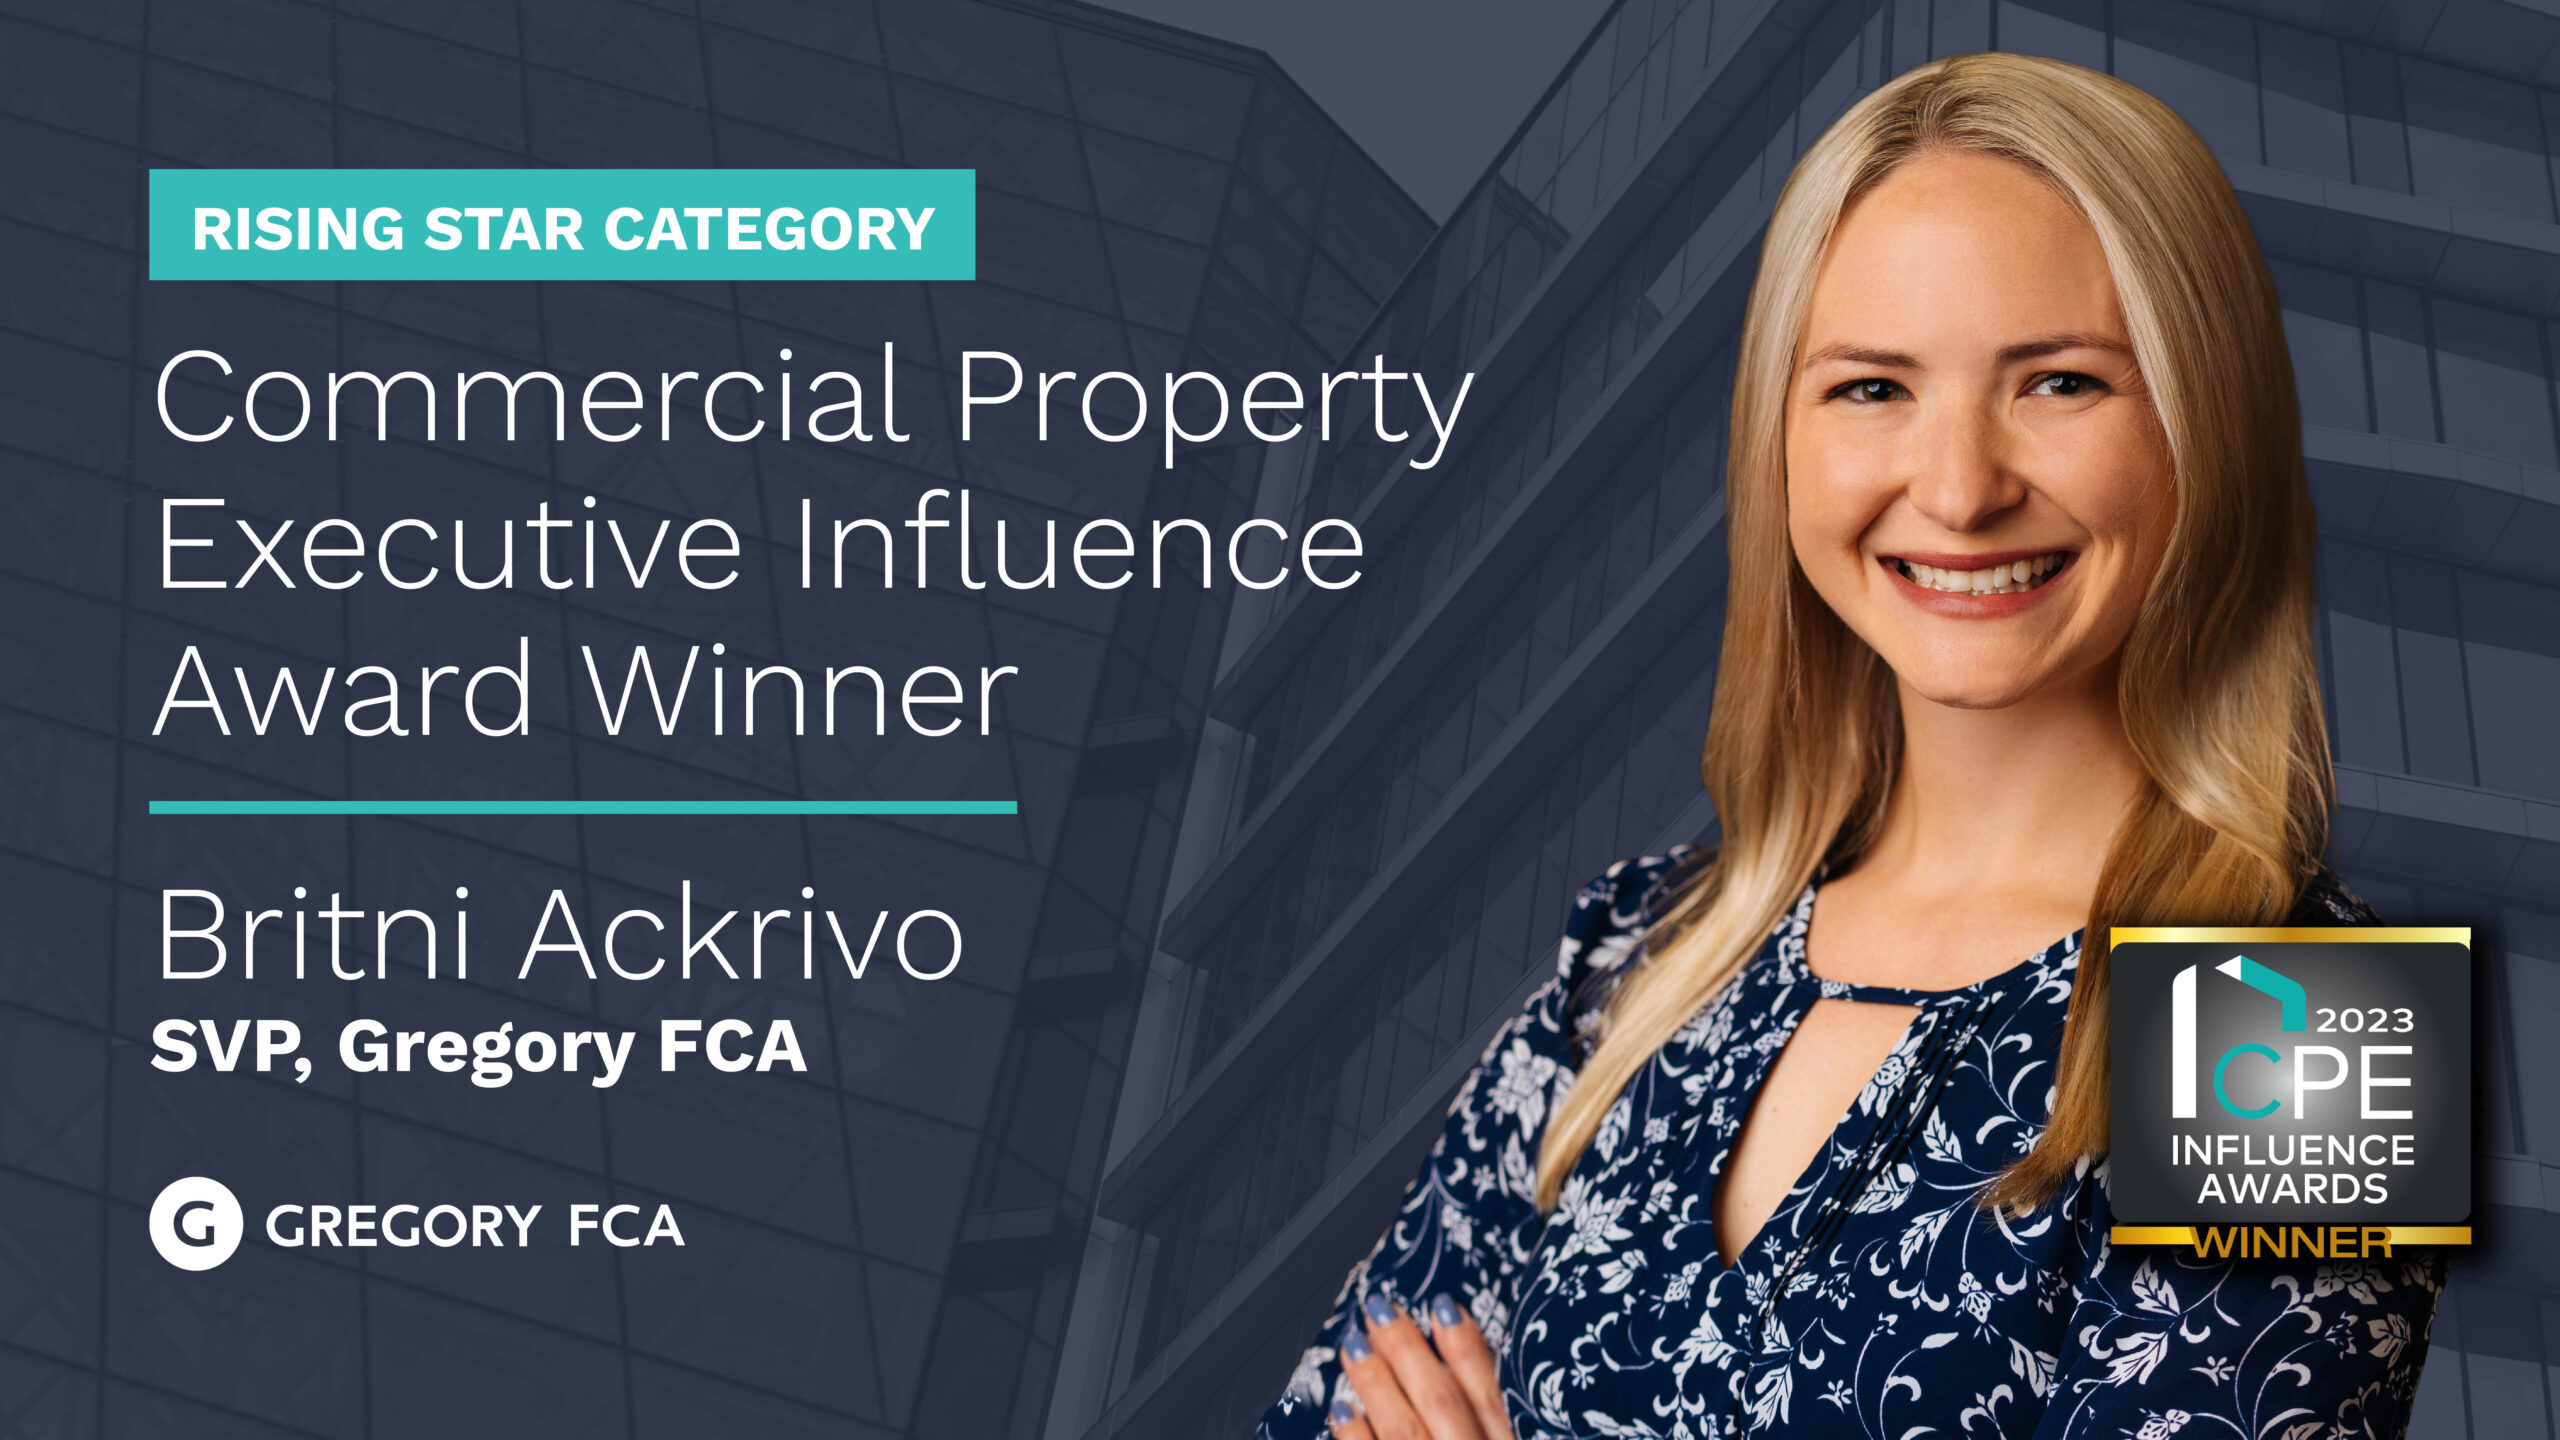 Senior Vice President Britni Ackrivo Wins Commercial Property Executive Influence Award in Rising Star Category